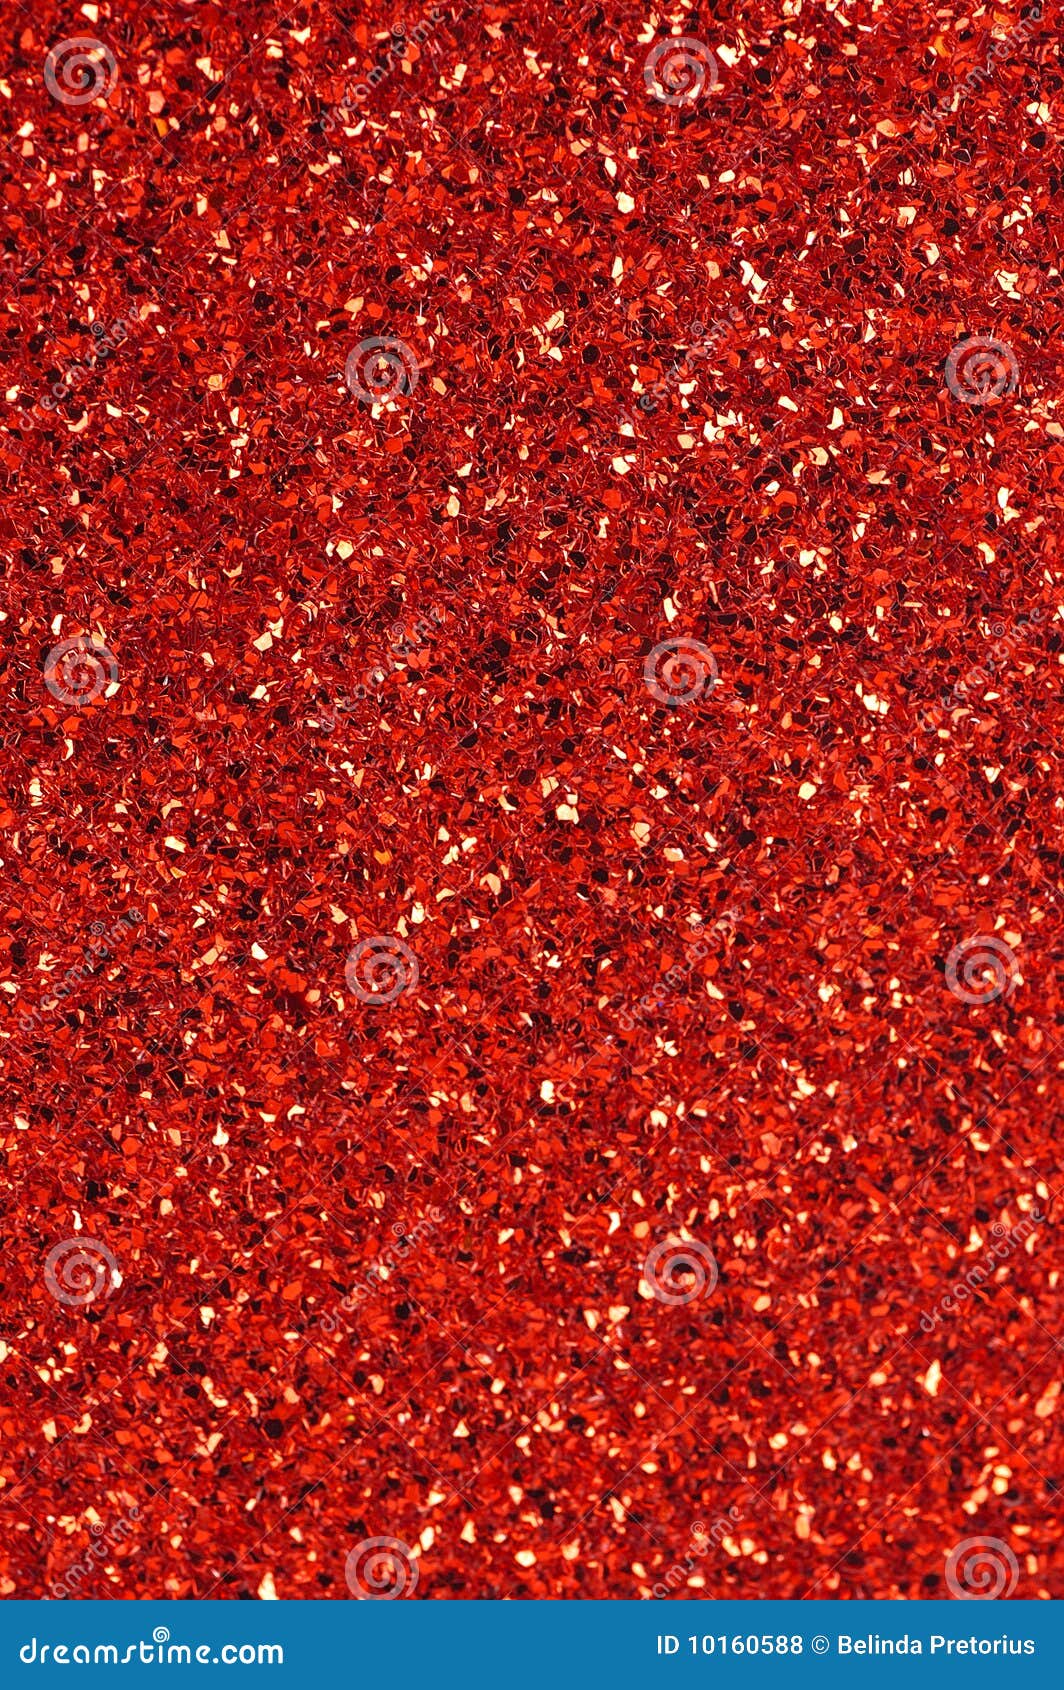 Bright Red Shiny Glitter Background Royalty Free Stock Photos - Image